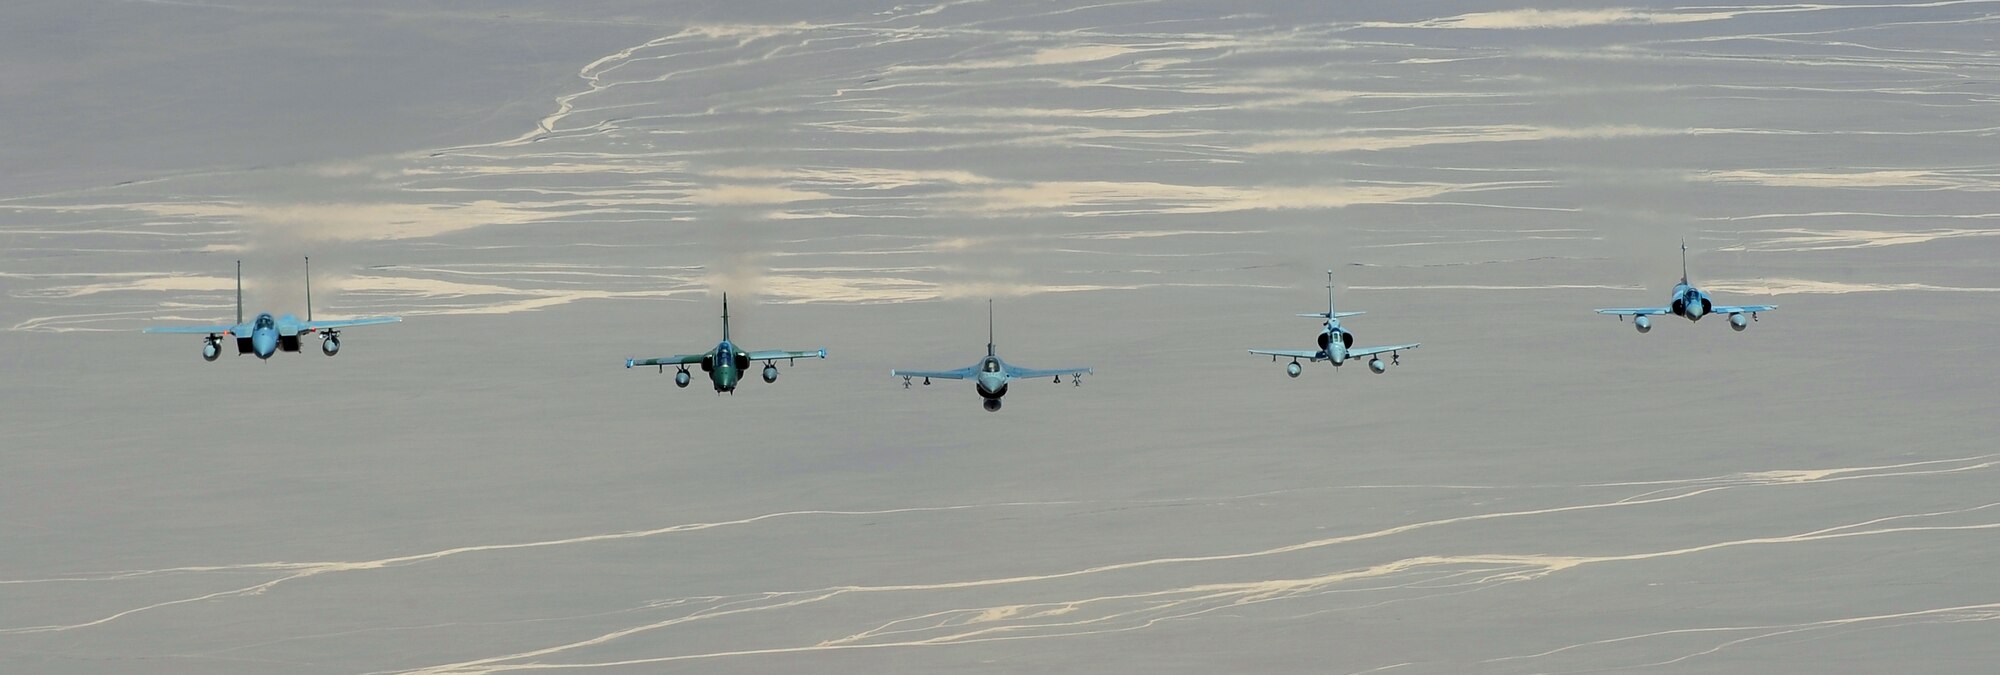 ANTOFAGASTA, Chile -- The United State’s F-15, Brazil’s A-1, Chile’s F-16, Argentina’s A-4 and France’s Mirage flying in formation during Exercise SALITRE II hosted by Chile. (U.S. Air Force Photo by Master Sergeant Daniel Farrell)